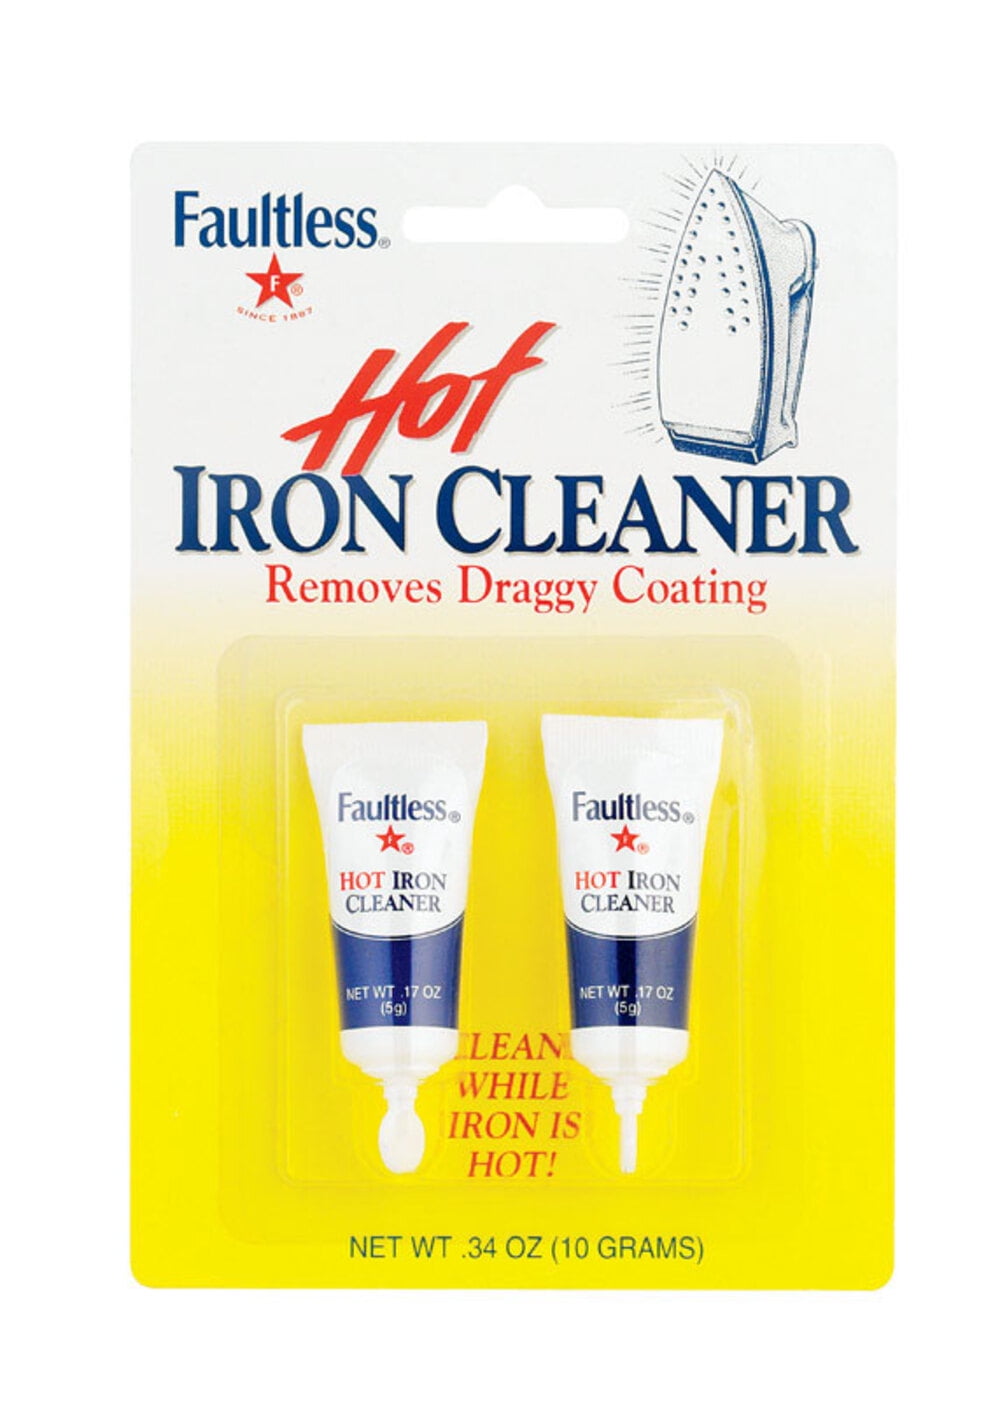 Faultless Iron Cleaner .17oz Tube Twin Pack - Fabric Care